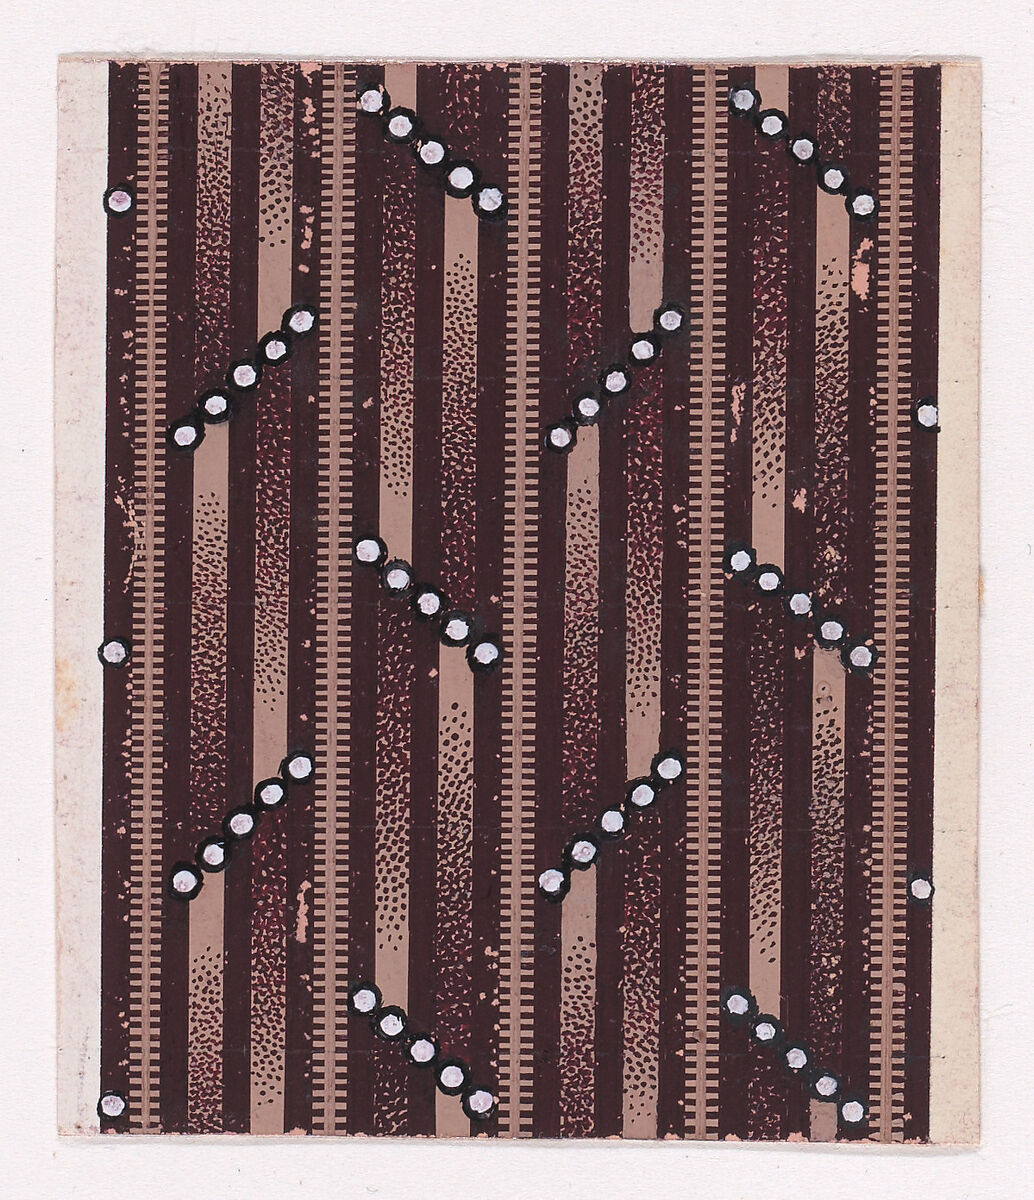 Textile Design with Alternating Horizontal Strips of Pearls over a Striped Background, Anonymous, Alsatian, 19th century, Gouache 